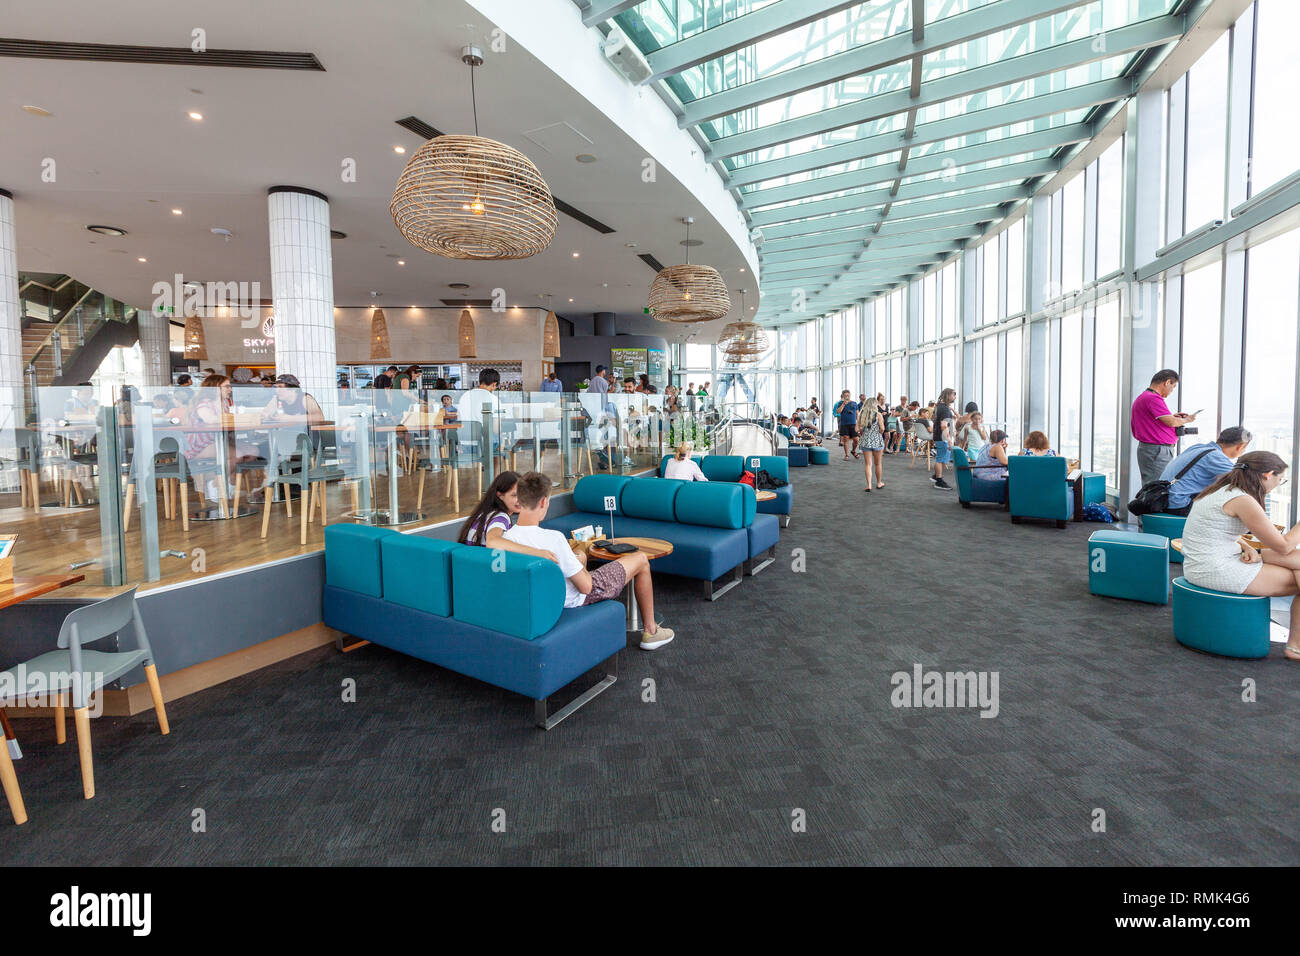 Gold Coast, Australia - January 6, 2019: People enjoying cafe and viewing platform at Skypoint observation desk Stock Photo